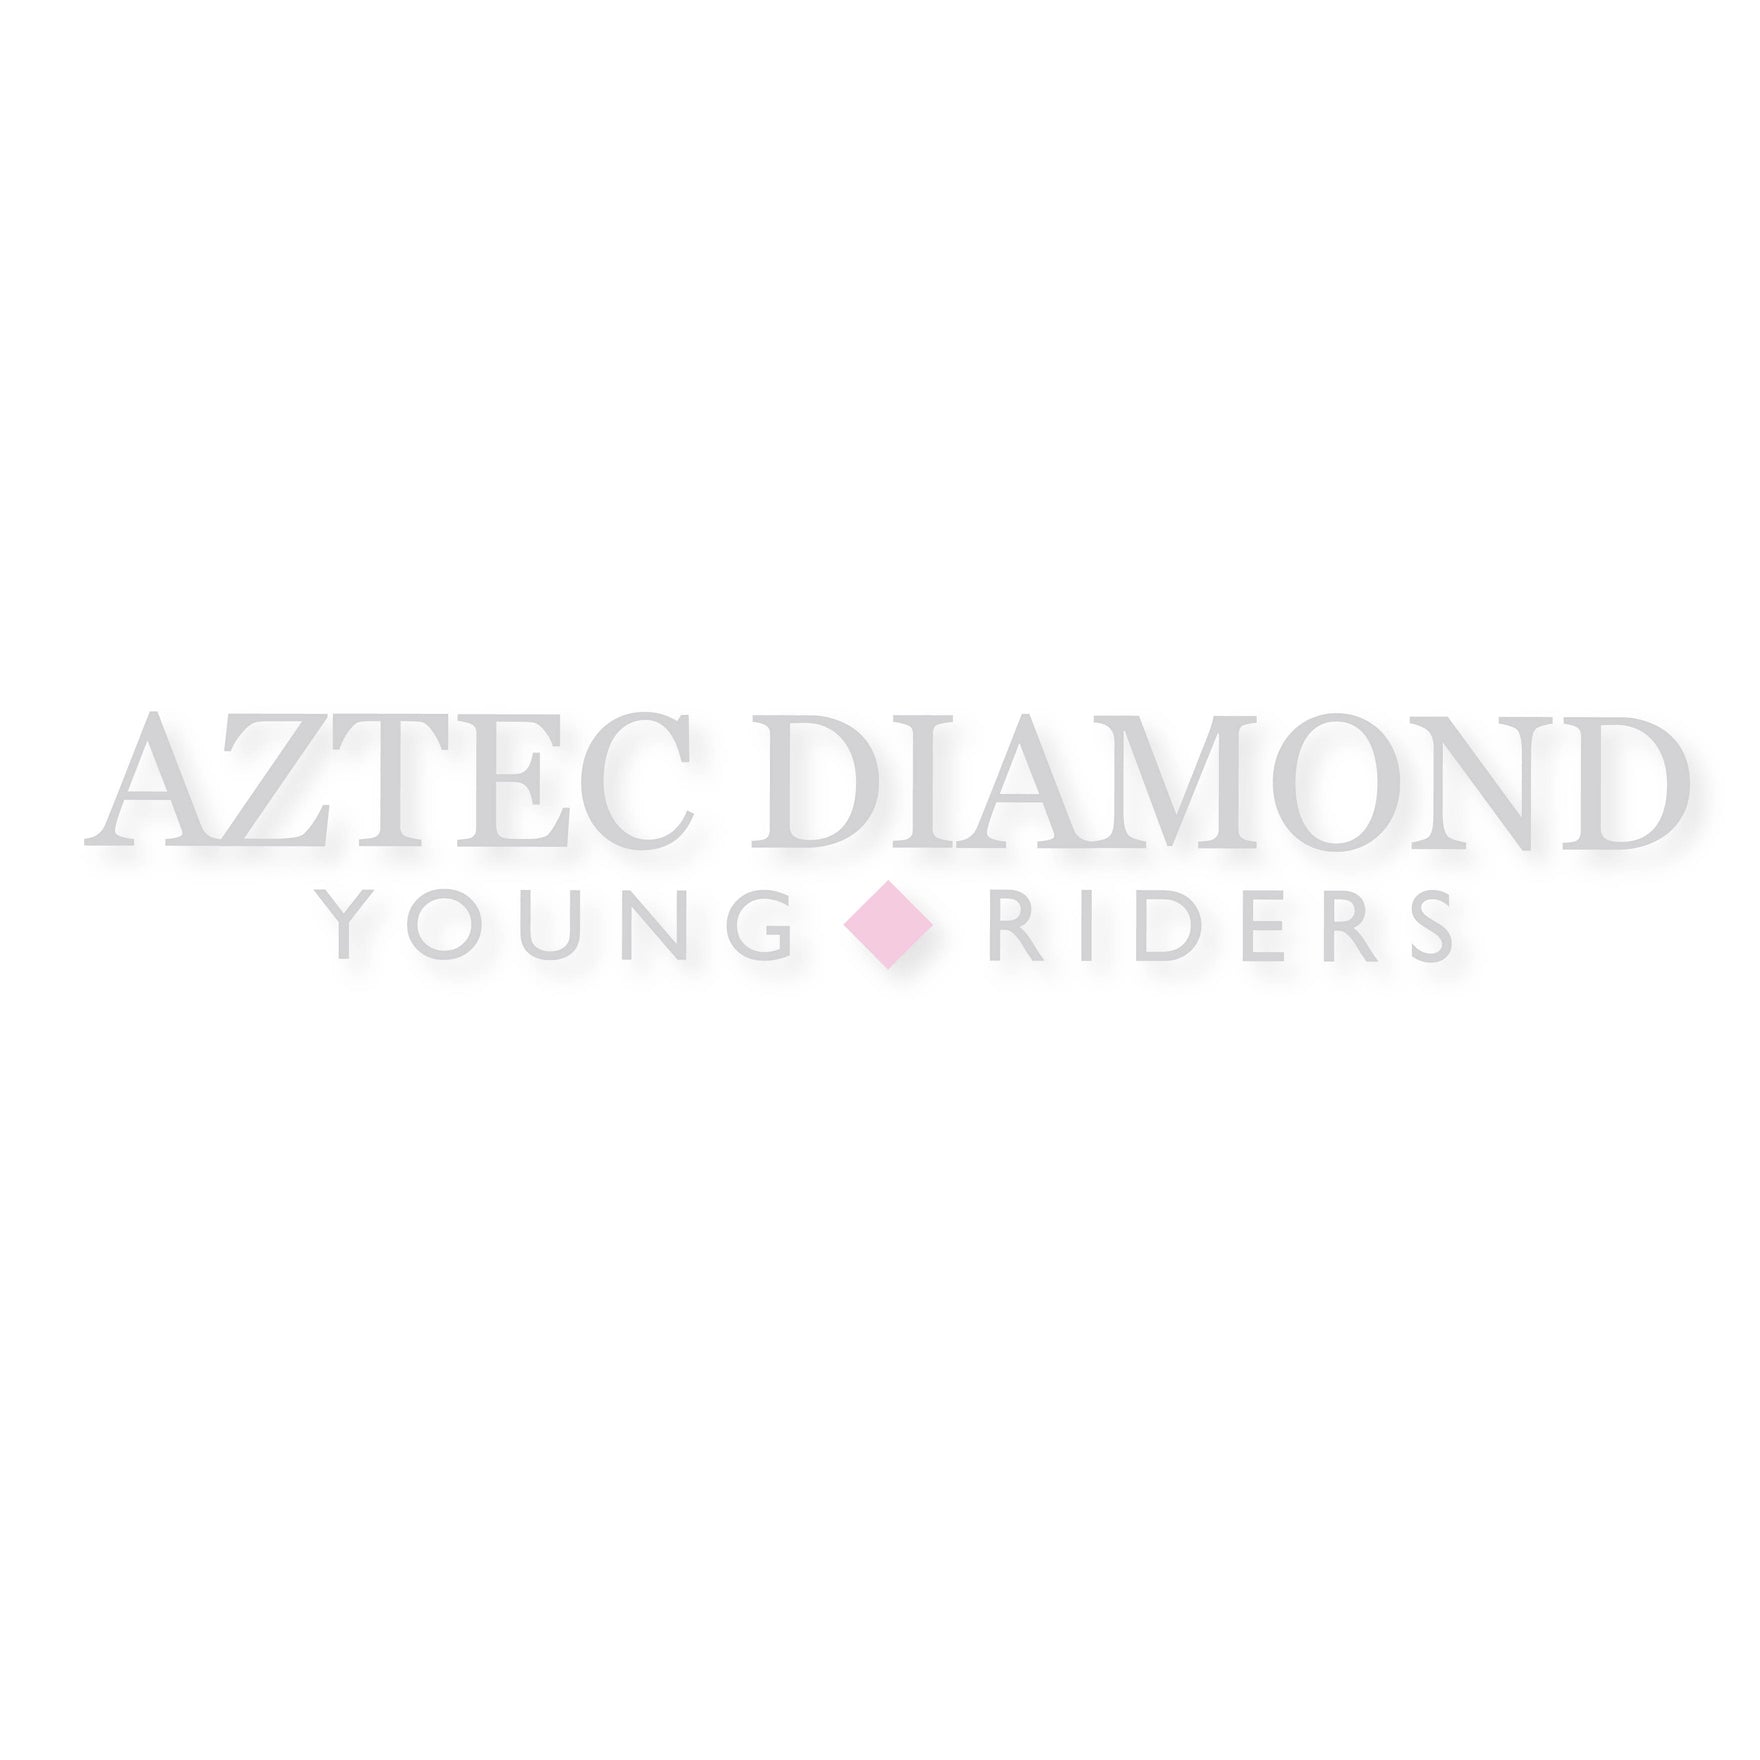 Aztec Diamond Equestrian are launching a Young Riders Collection! 